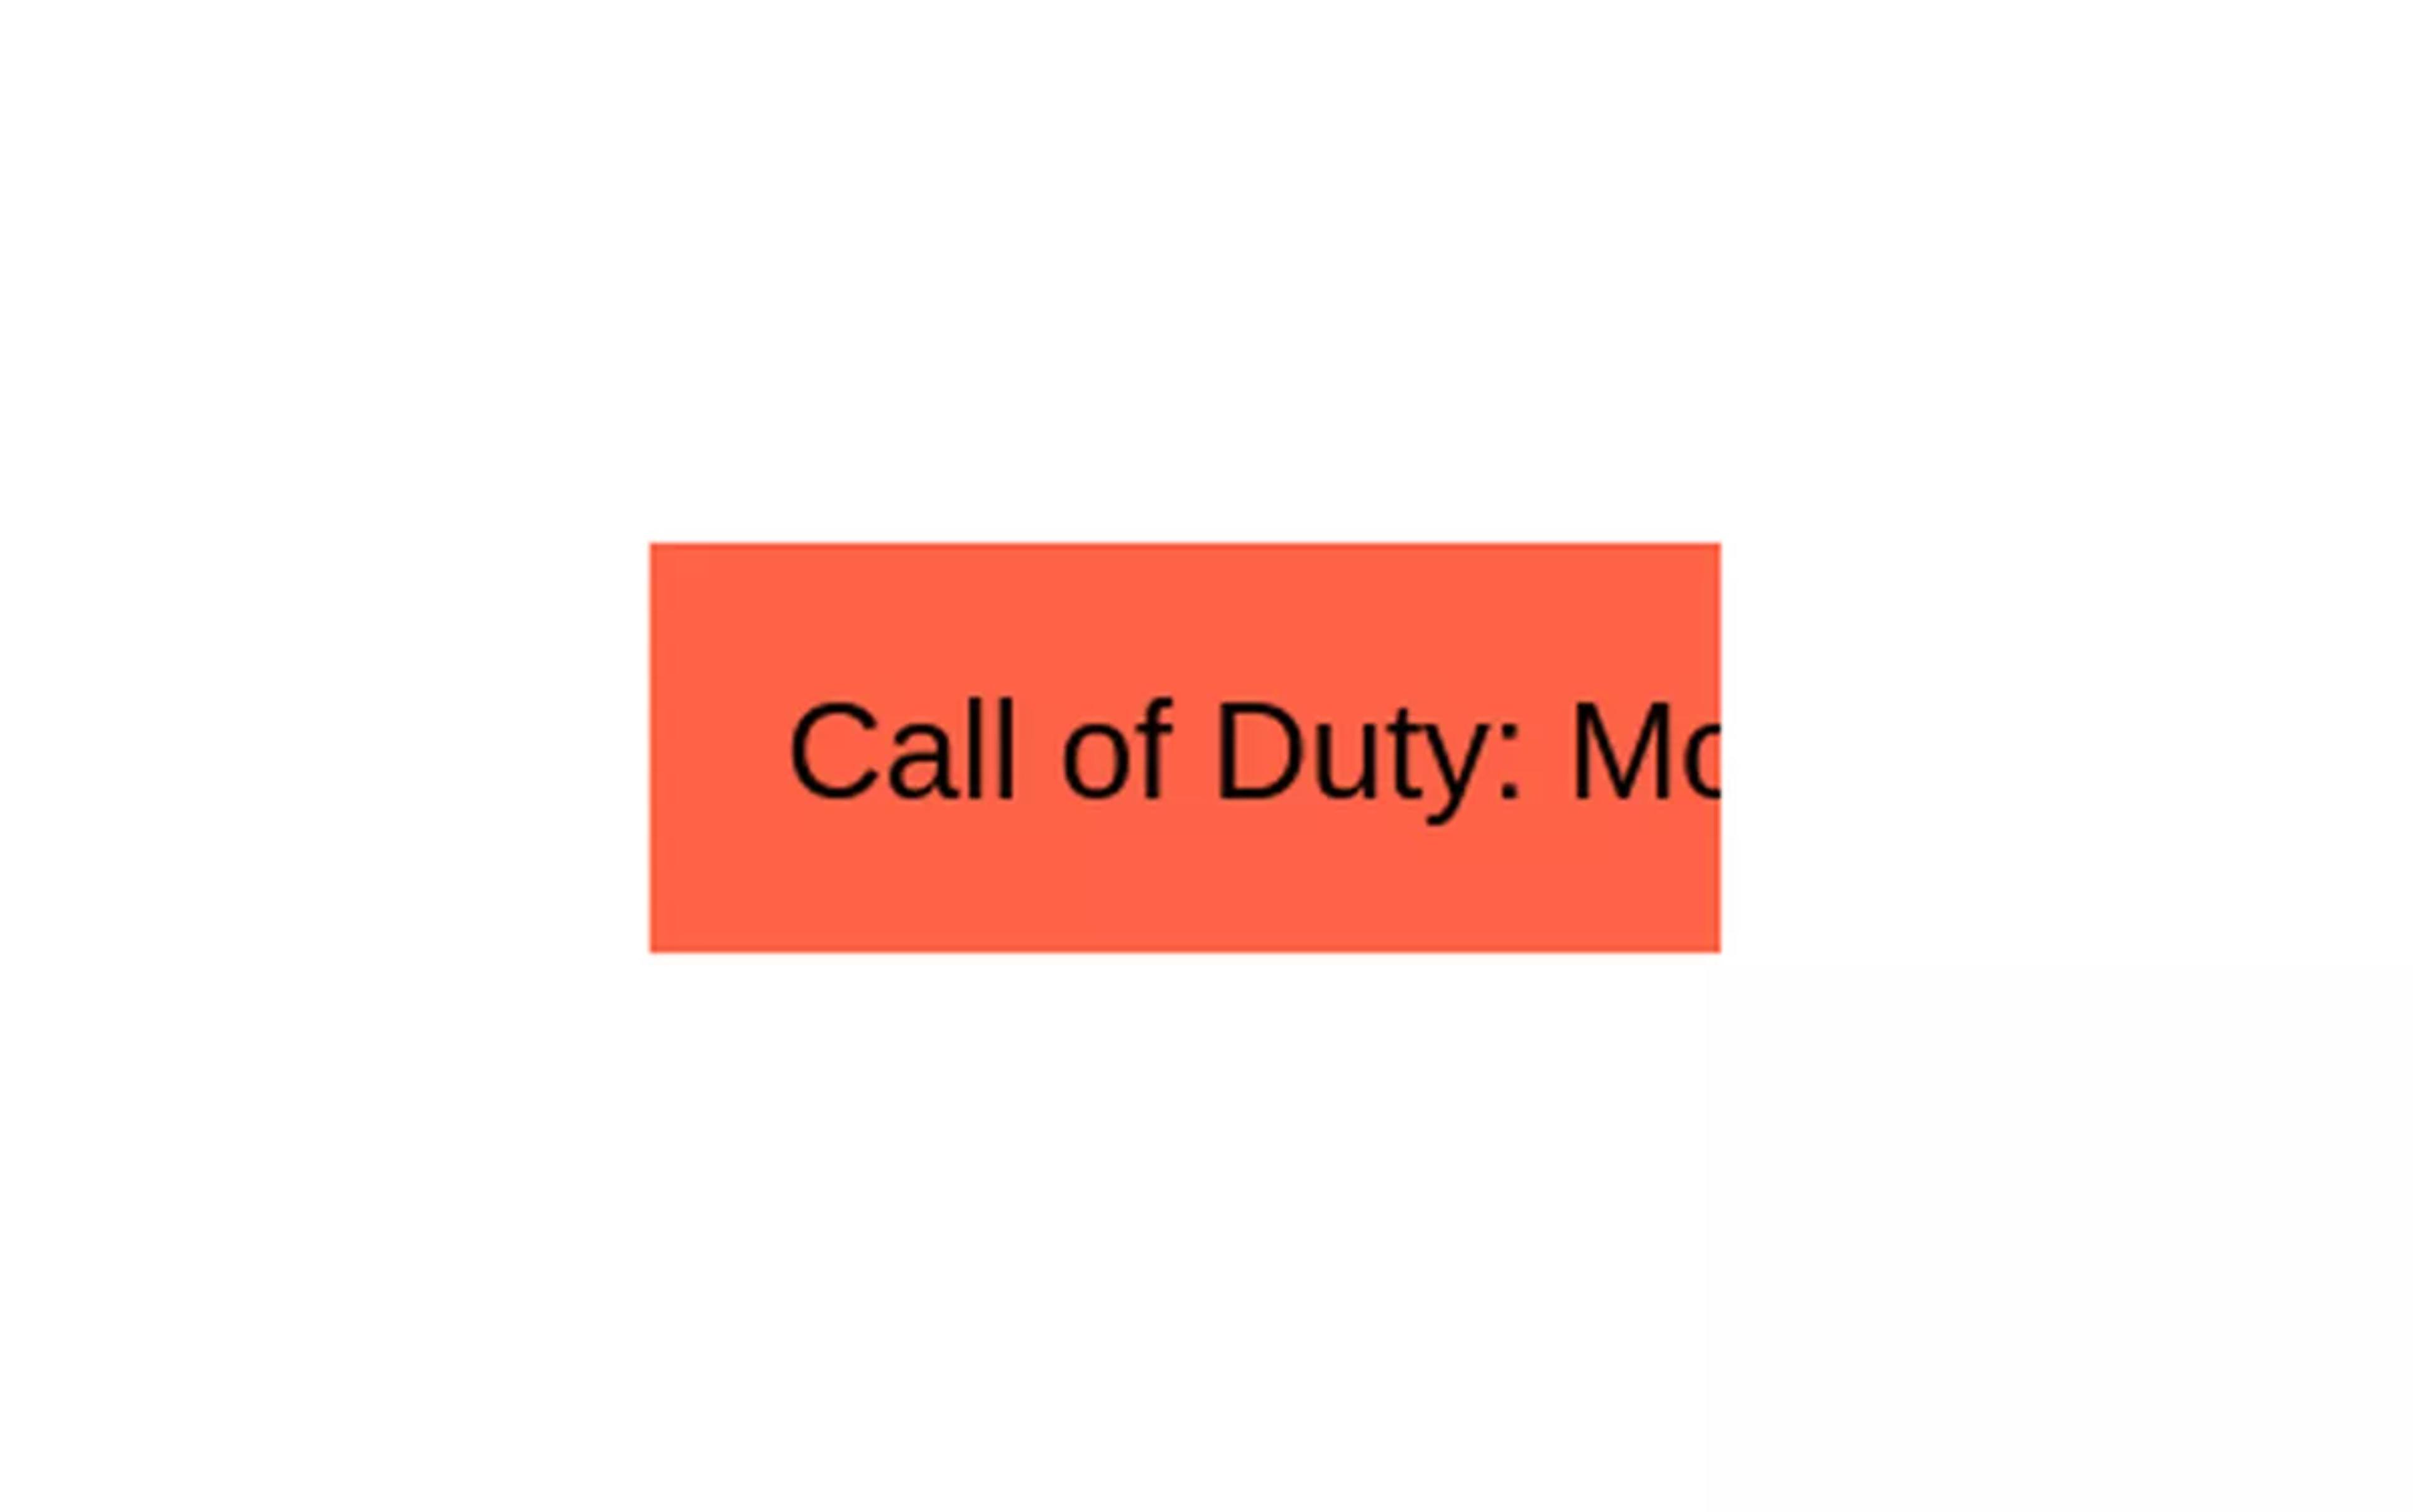 Box with the text Call of Duty: Modern Warfare, Modern Warfare is clipped by the border and hidden